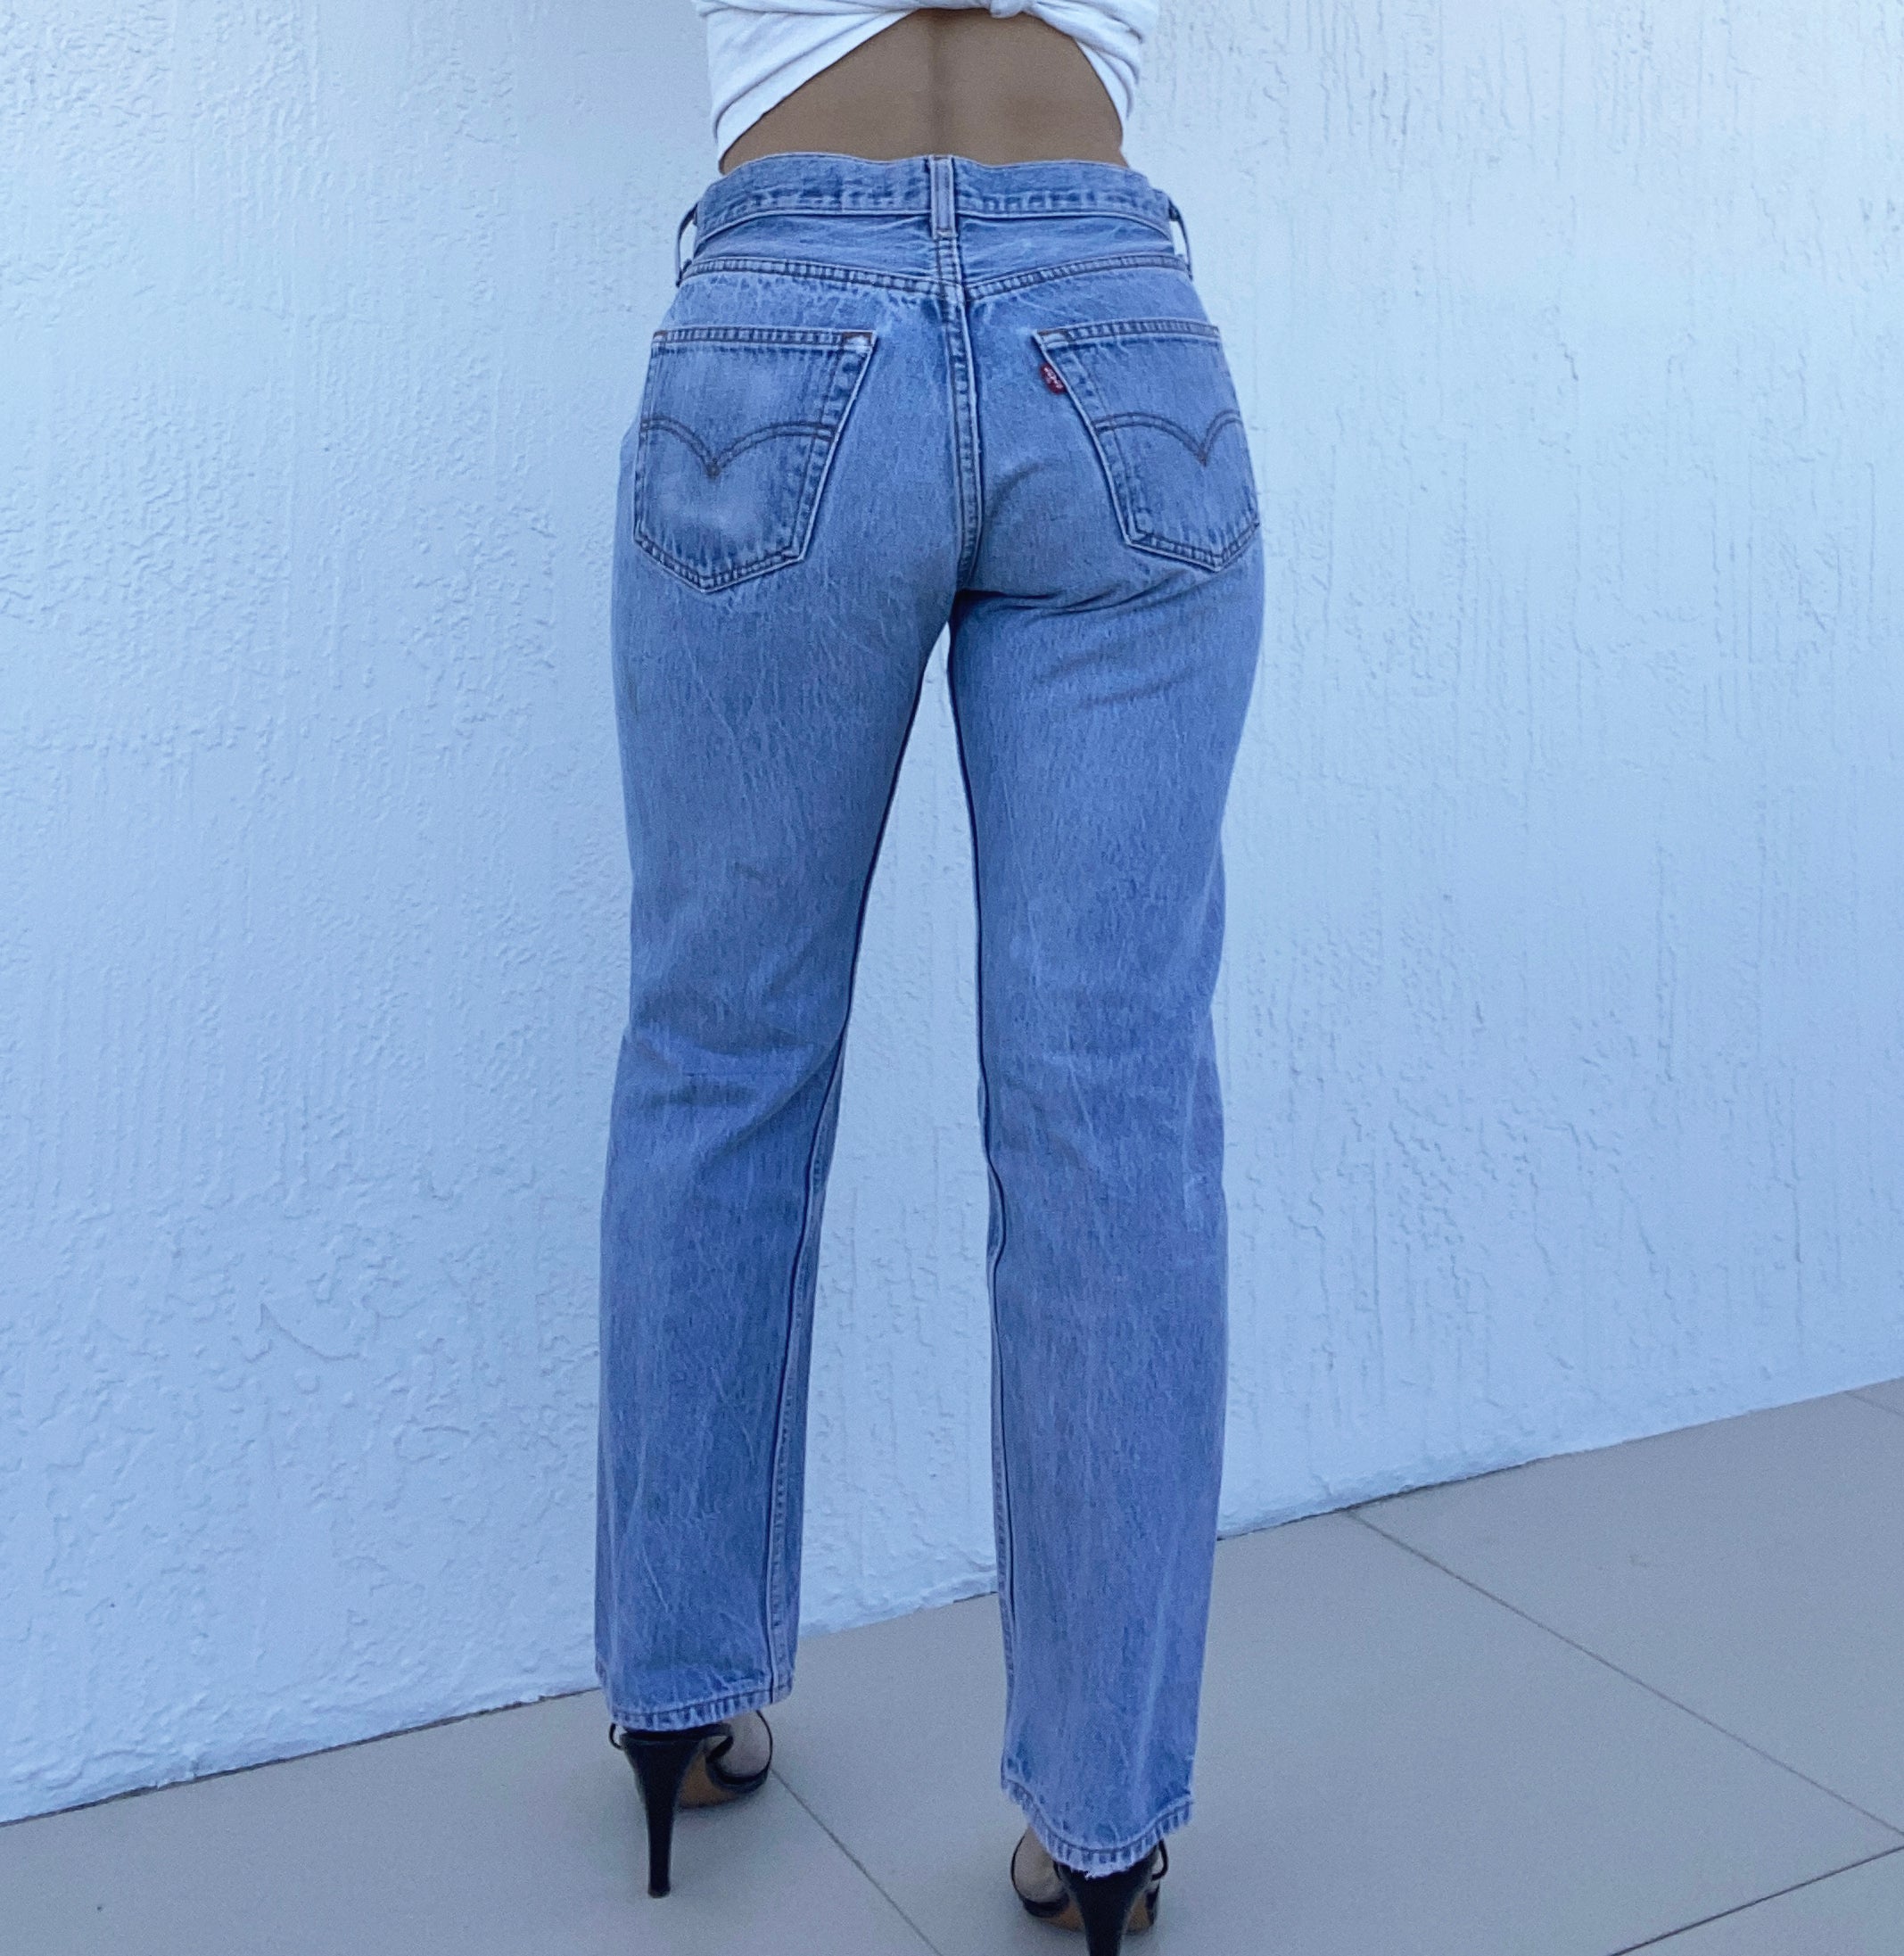 Vintage High-Waisted Button Fly Levi's Jeans